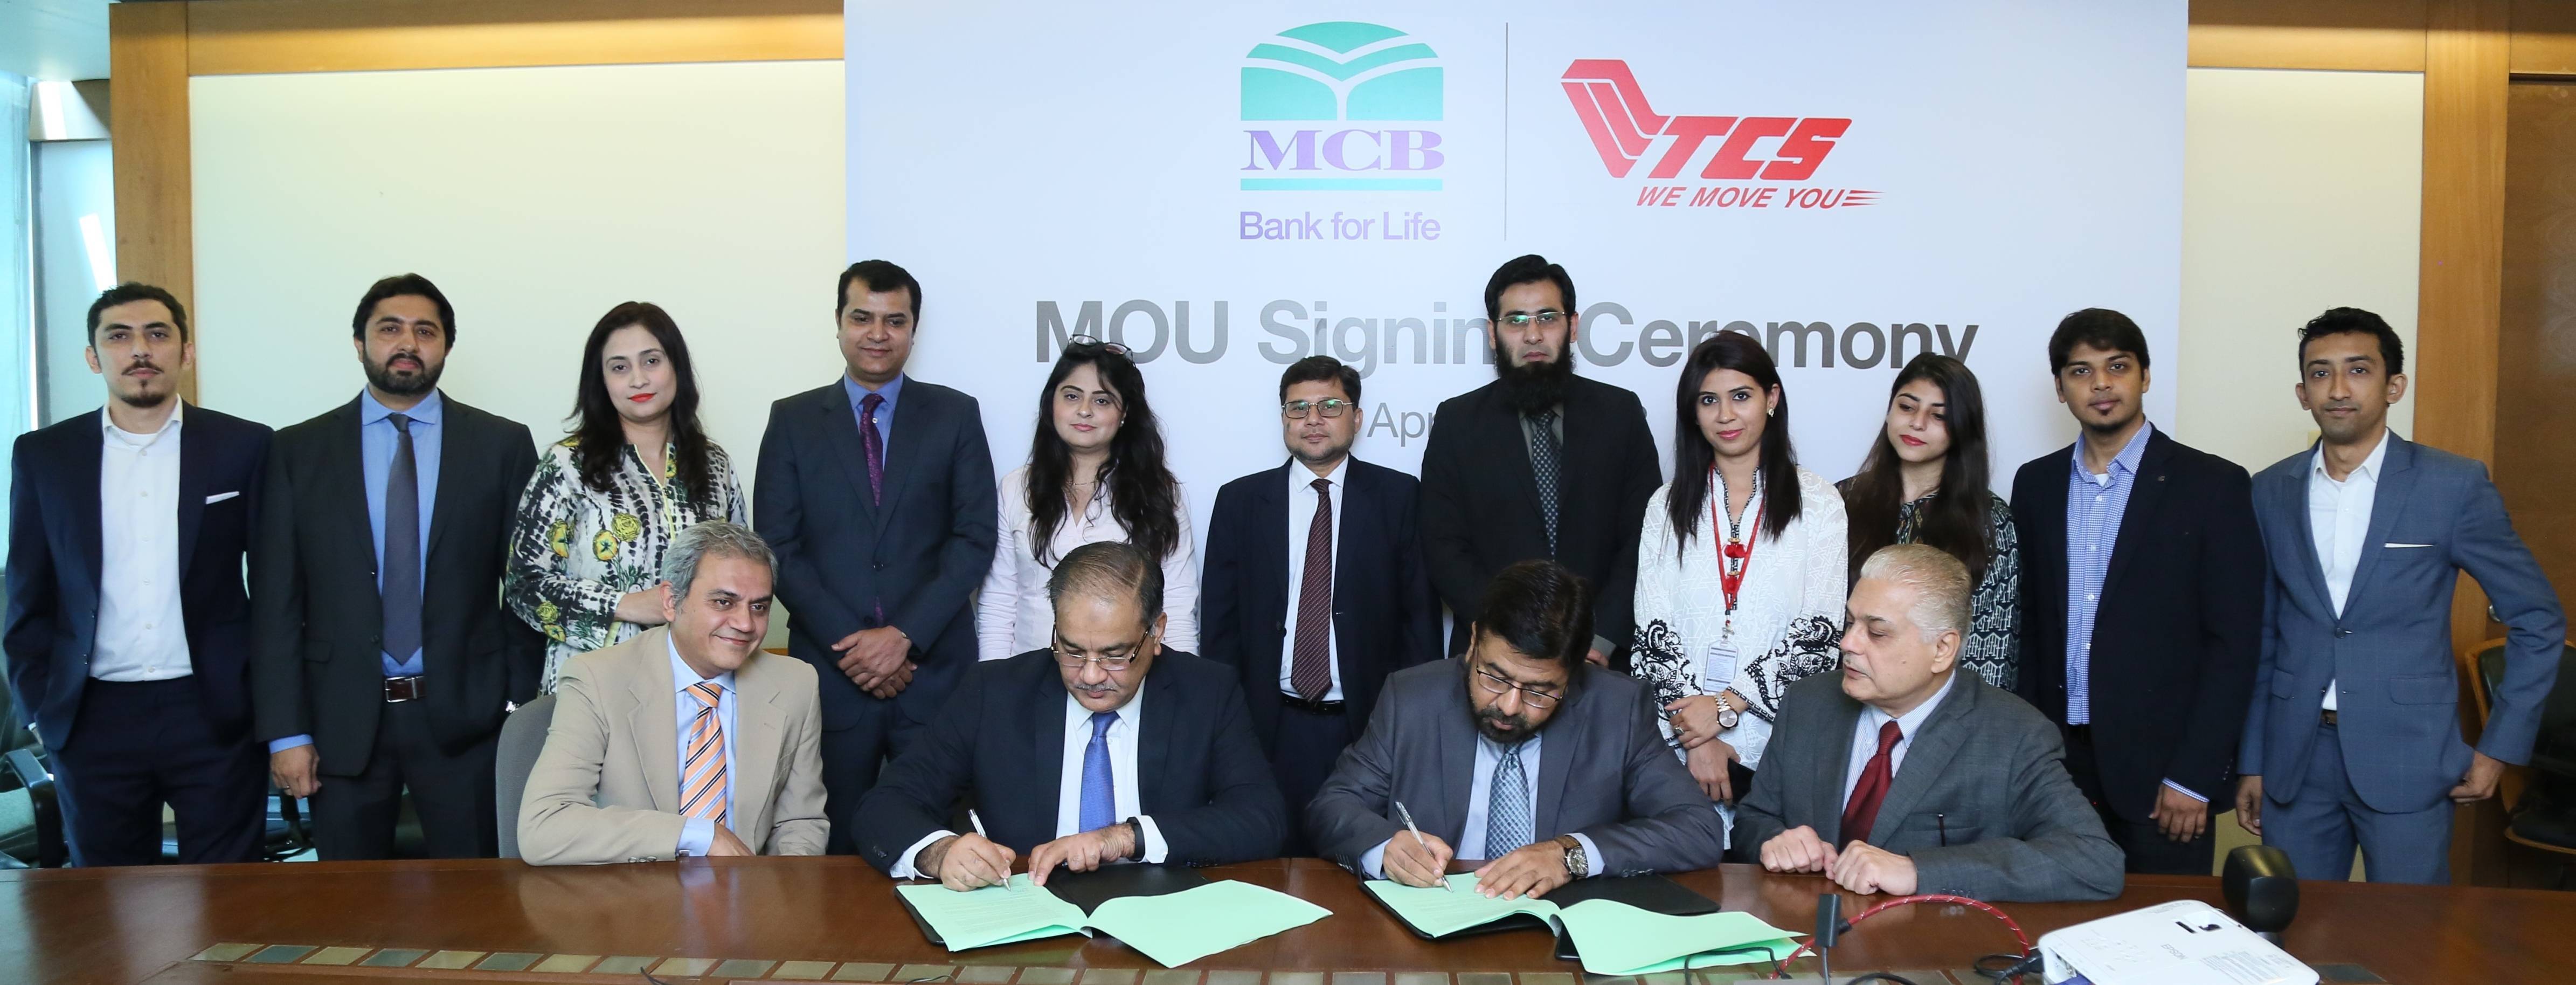 MCB Bank Ltd and TCS Pvt. Ltd. enter into alliance for mutually beneficial services